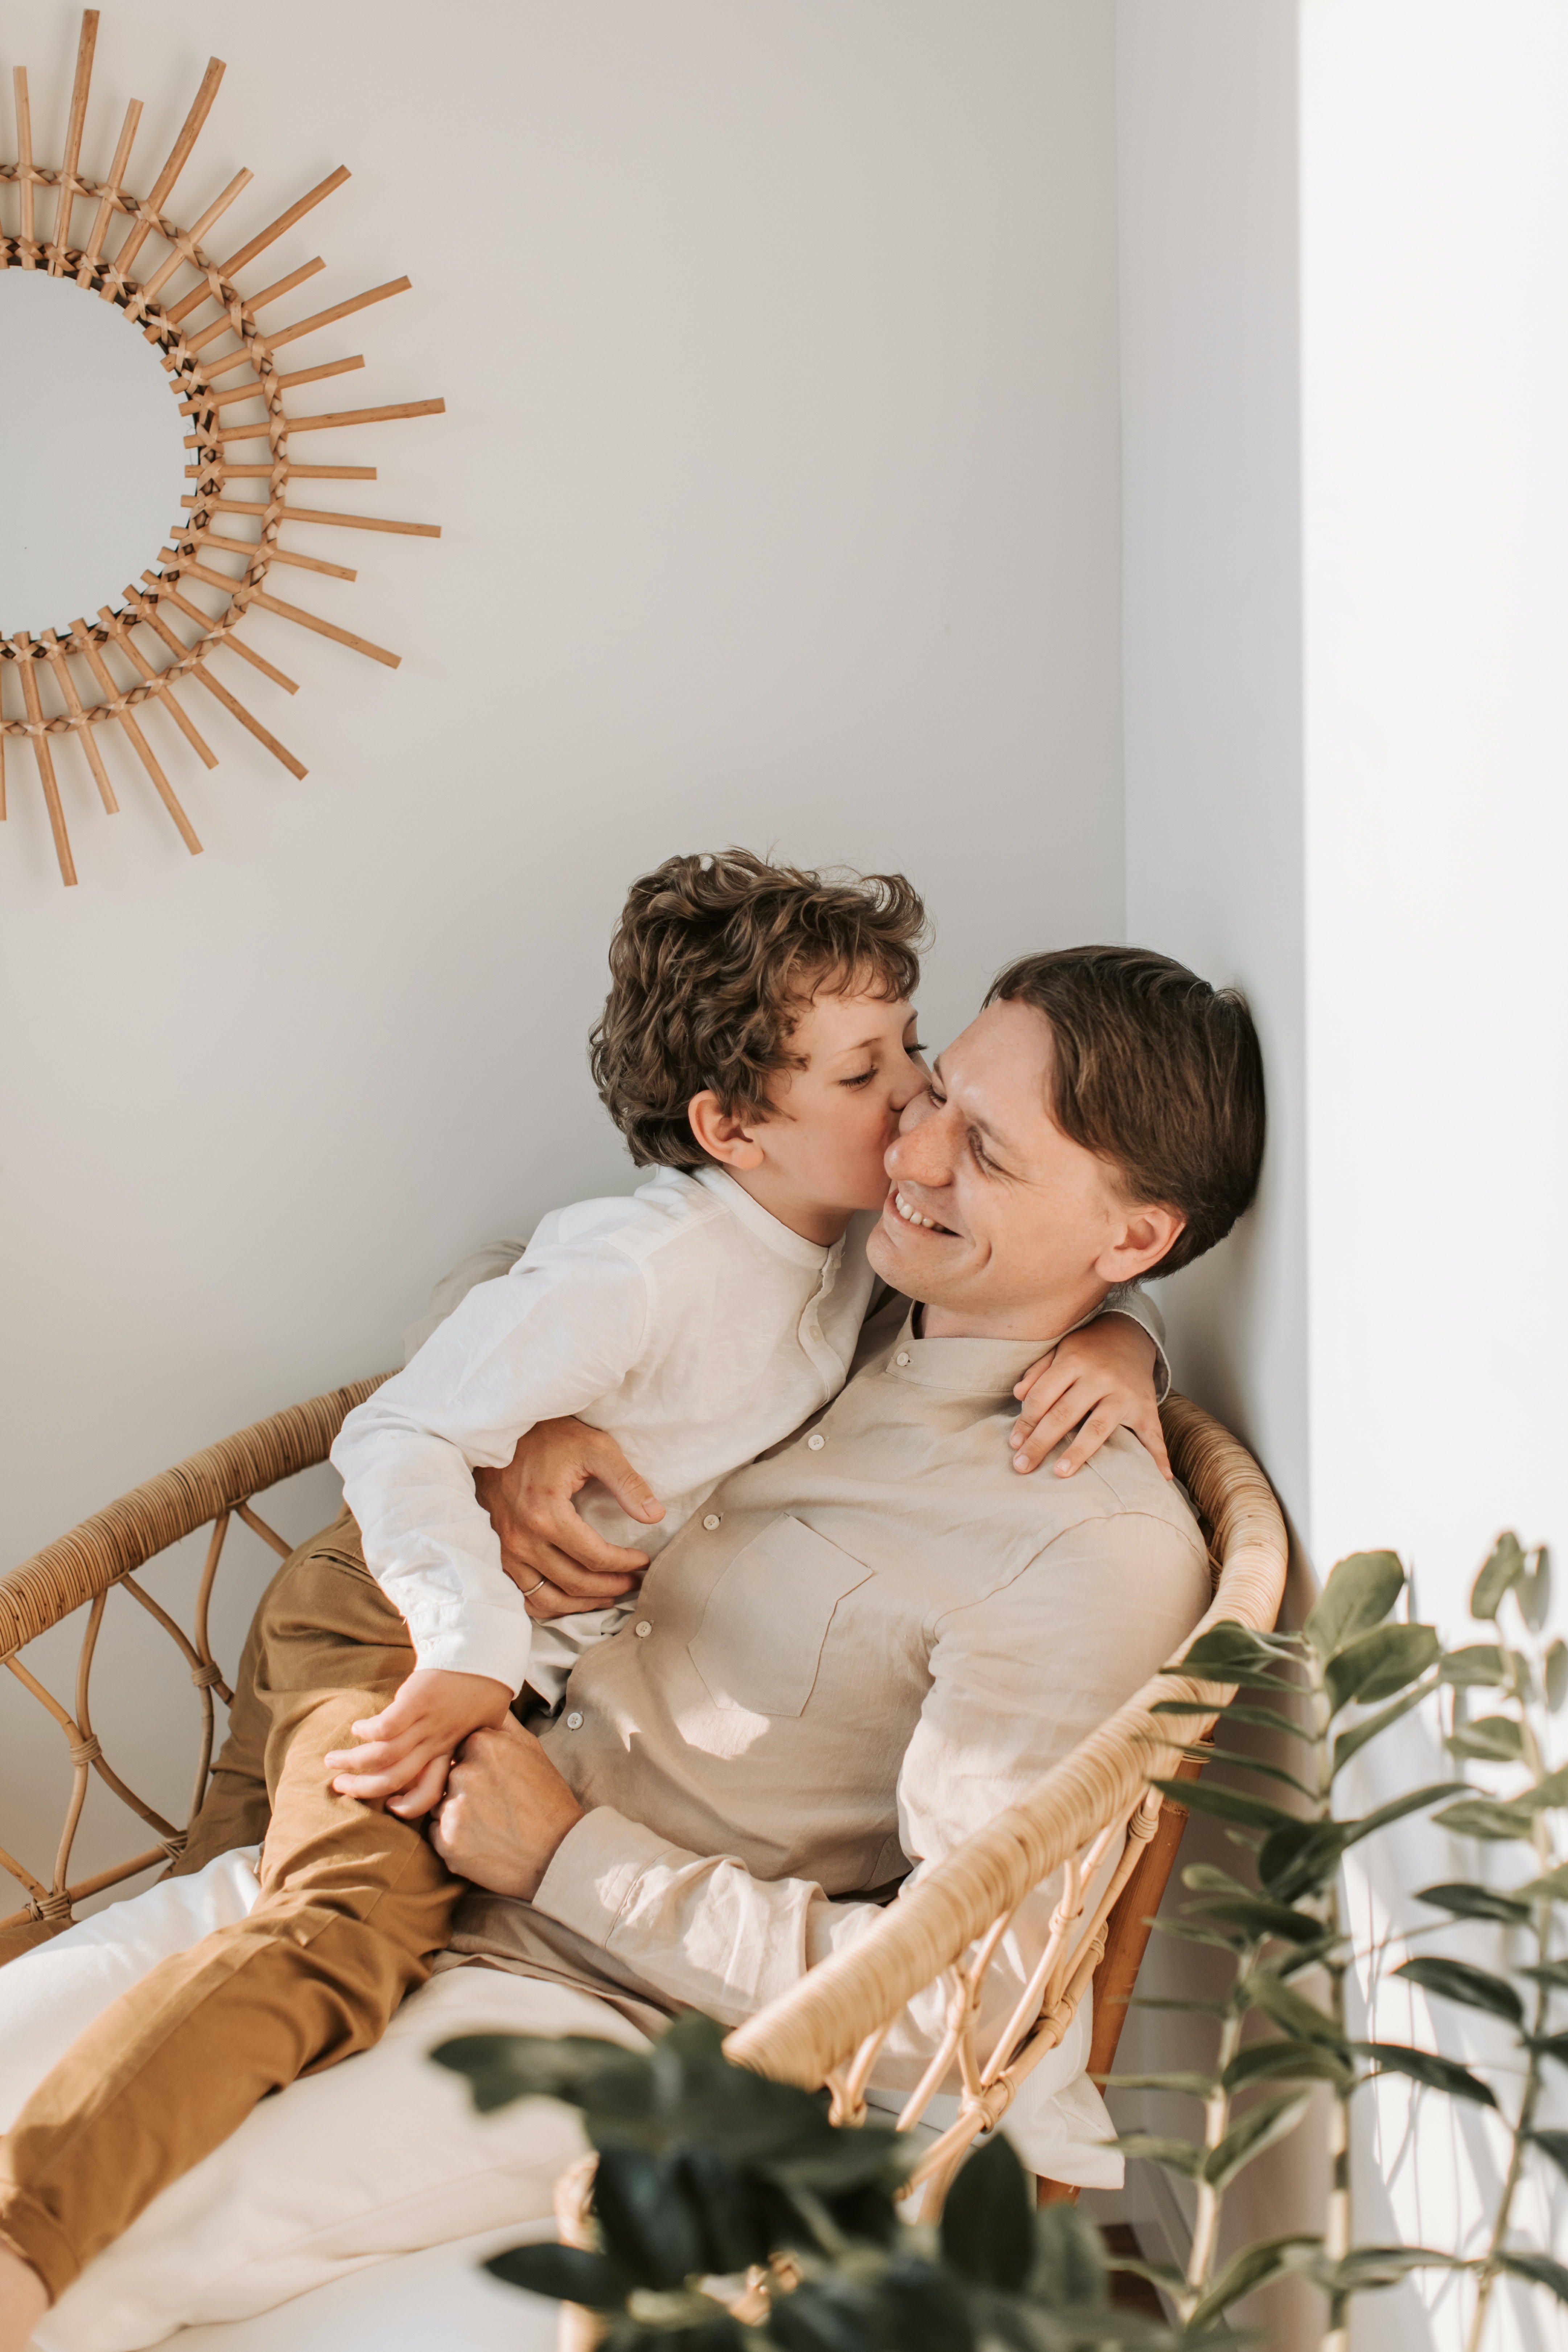 The little boy was happy to have his father back, and loved to ask him questions. | Photo: Pexels/Vlada Karpovich